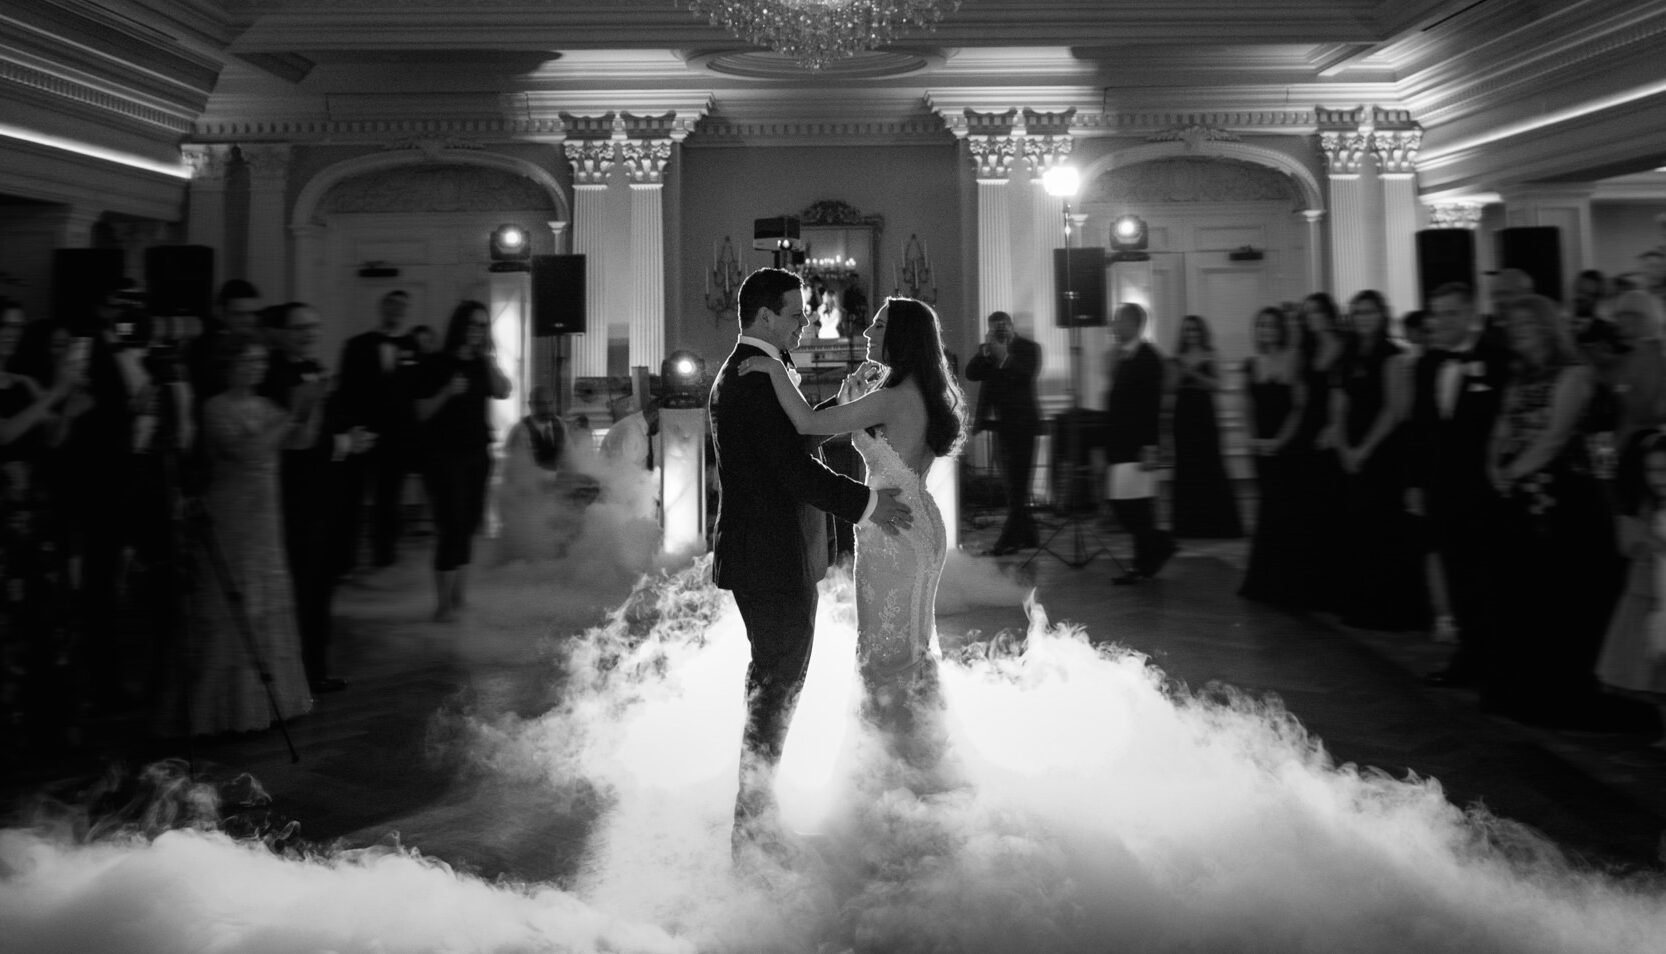 A couple shares their first dance on a smoke-filled dance floor under a grand chandelier at their Park Savoy wedding, surrounded by guests in an elegant ballroom.